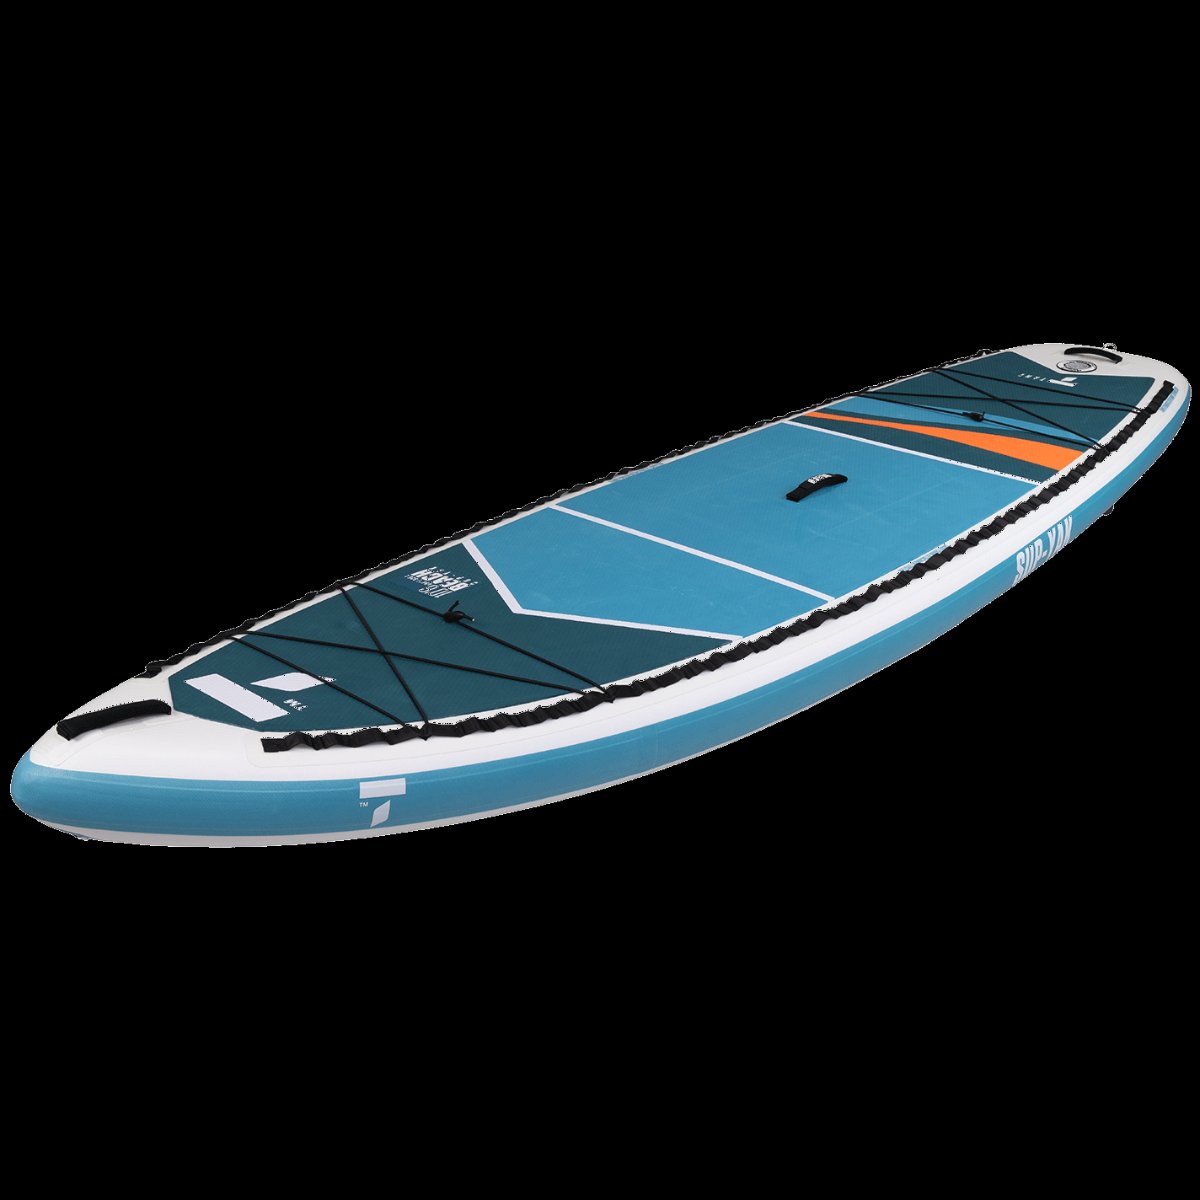 Brand new TAHE 106 BEACH SUP-YAK inflatable stand up paddle board package!